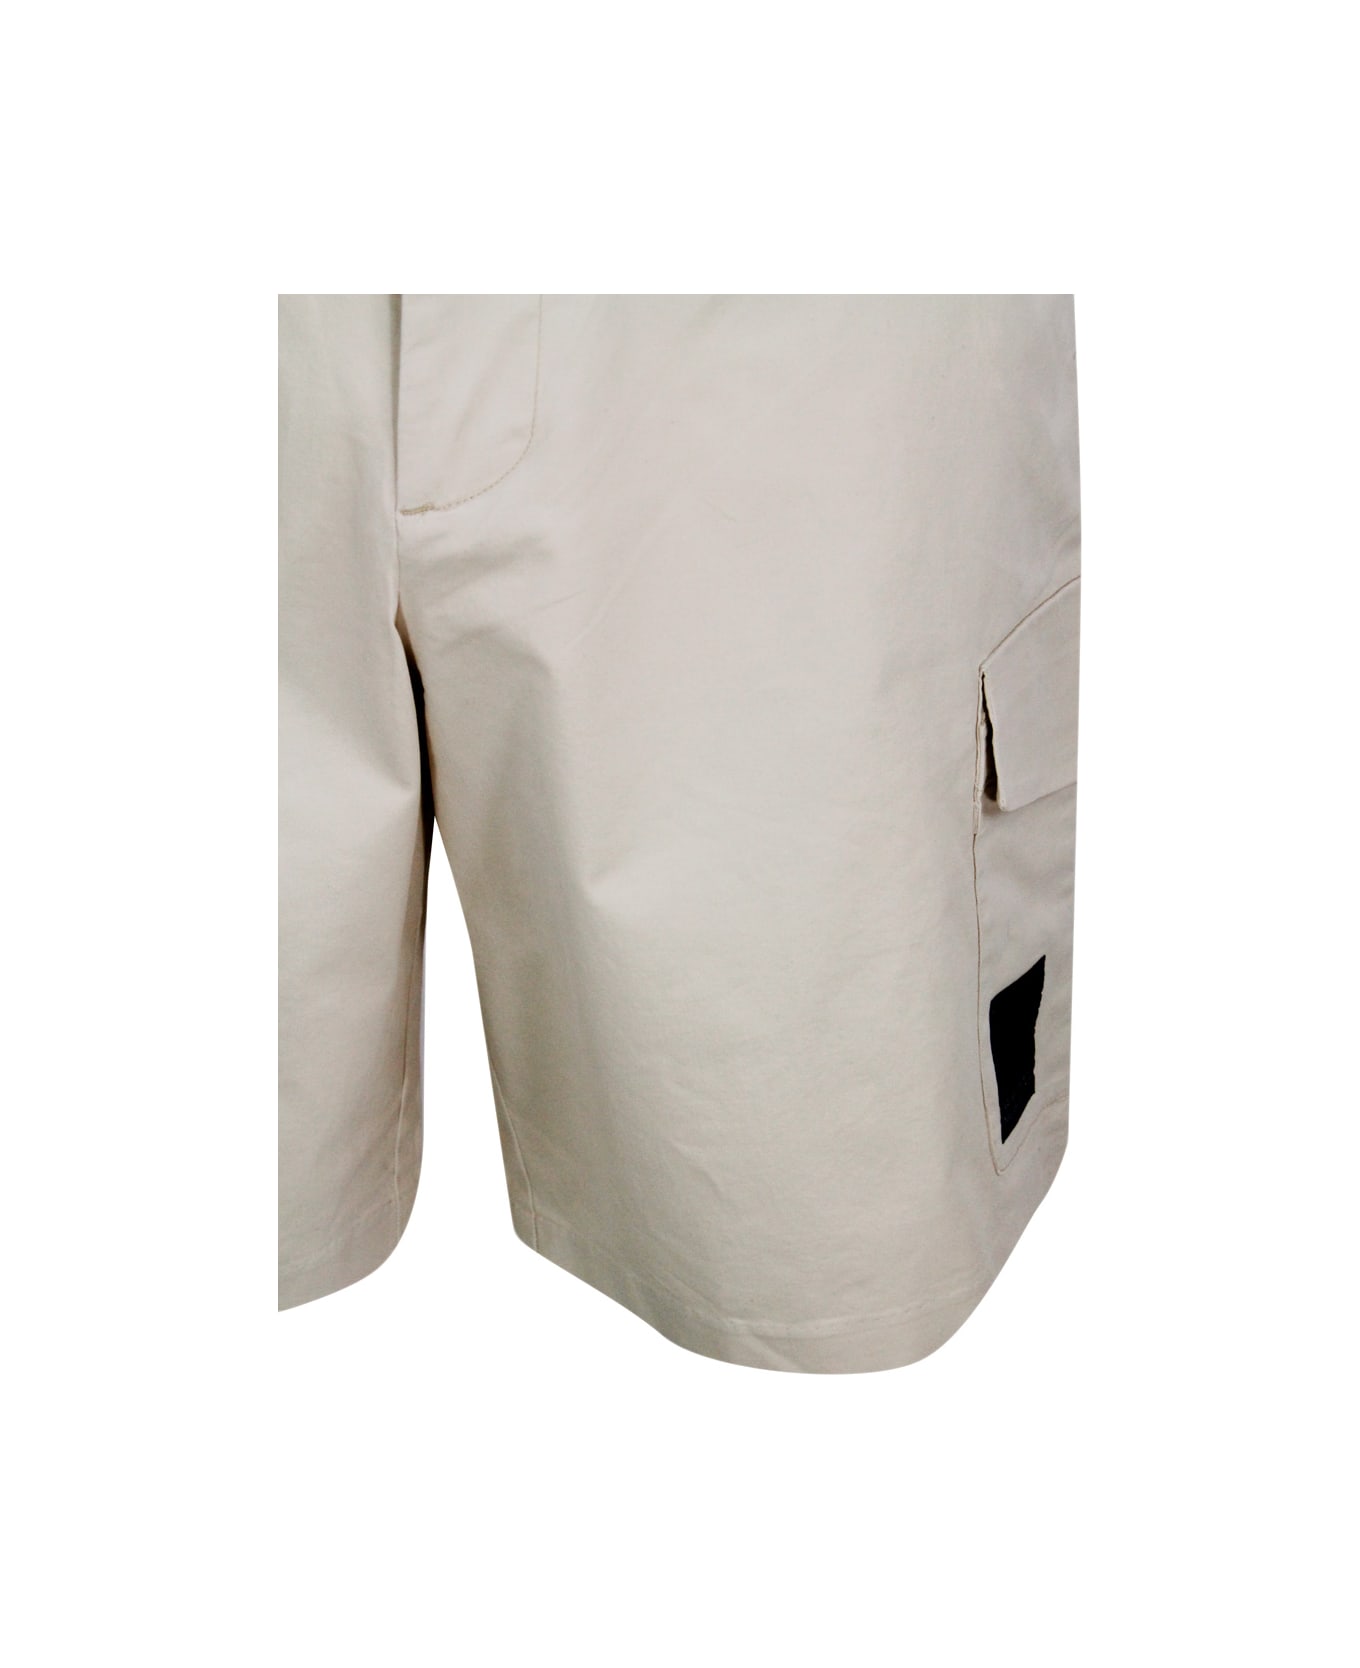 Armani Collezioni Stretch Cotton Bermuda Shorts, Cargo Model With Large Pockets On The Leg And Zip And Button Closure - Beige ショートパンツ